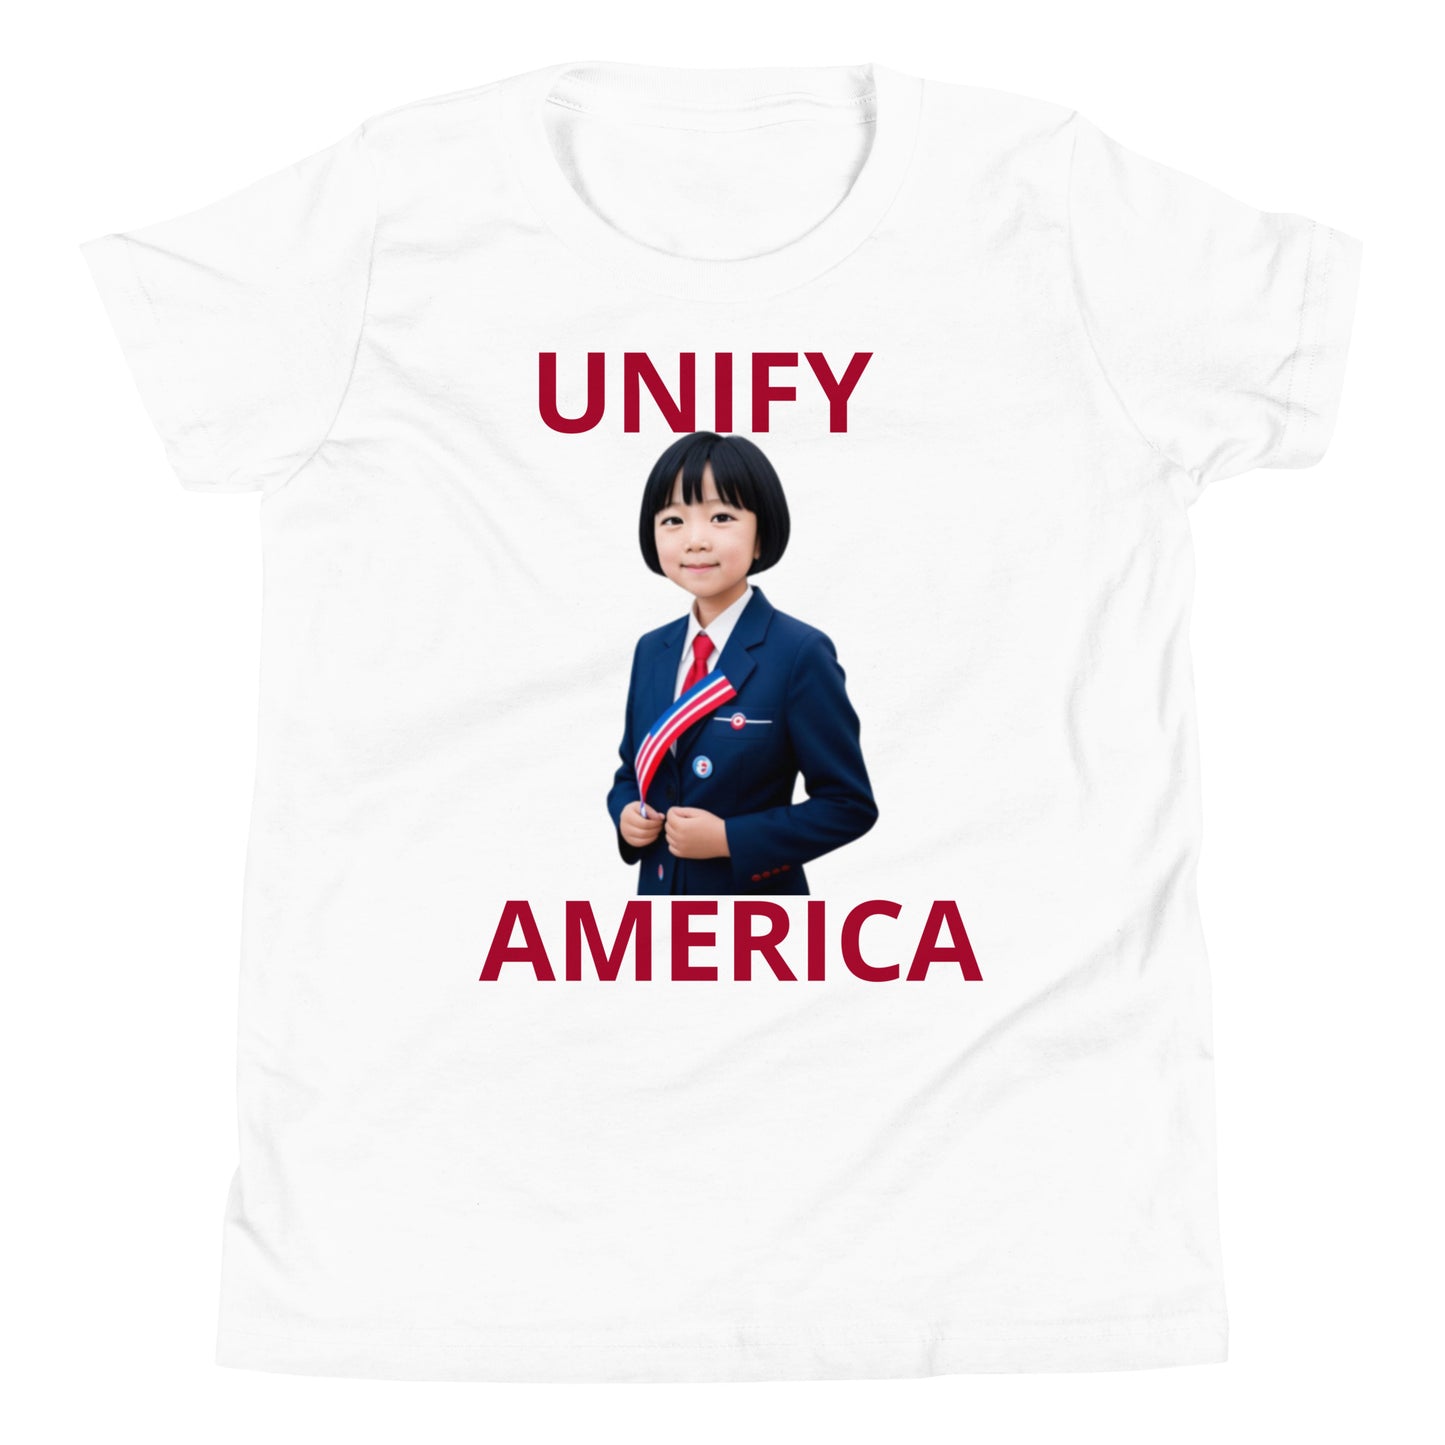 Unify America Asian Youth Unisex Tee